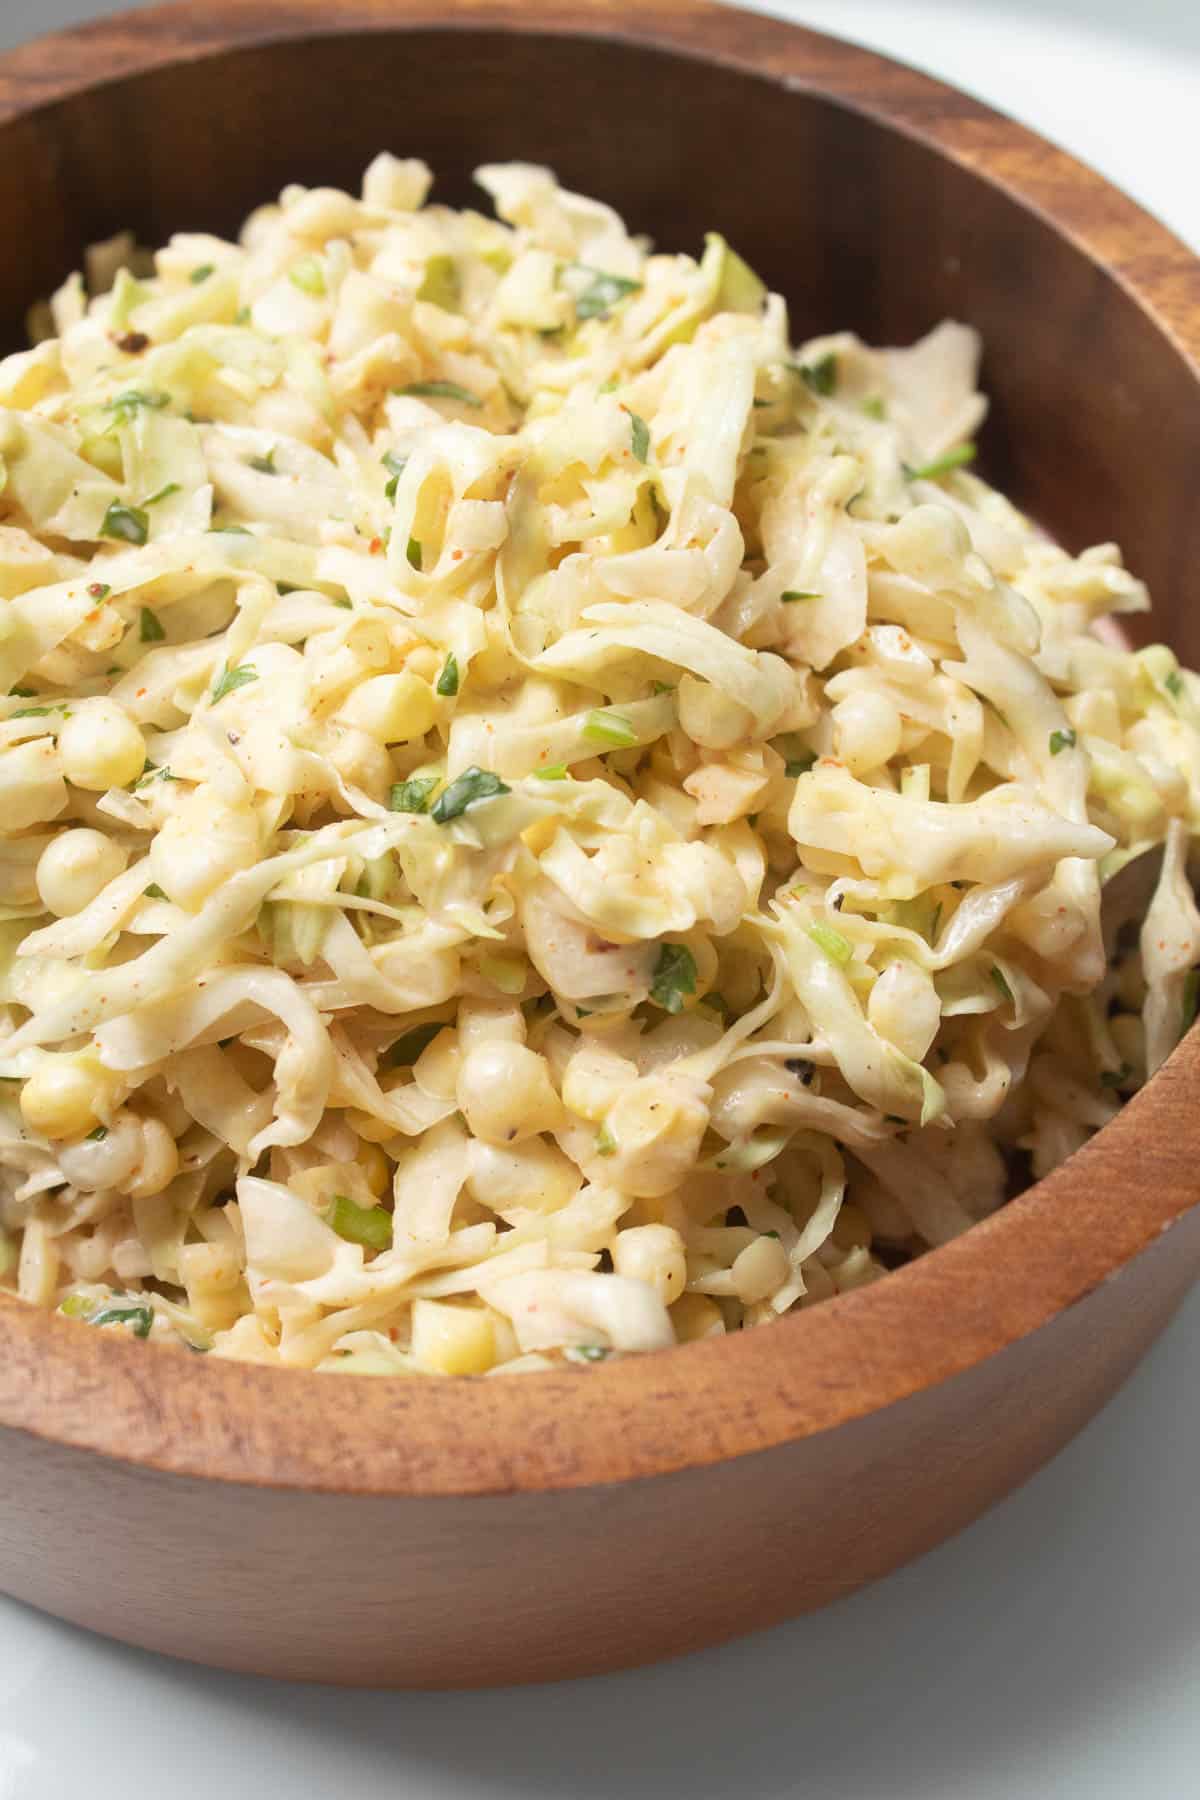 A pale yellow cabbage slaw with corn kernels and green flecks of cilantro.